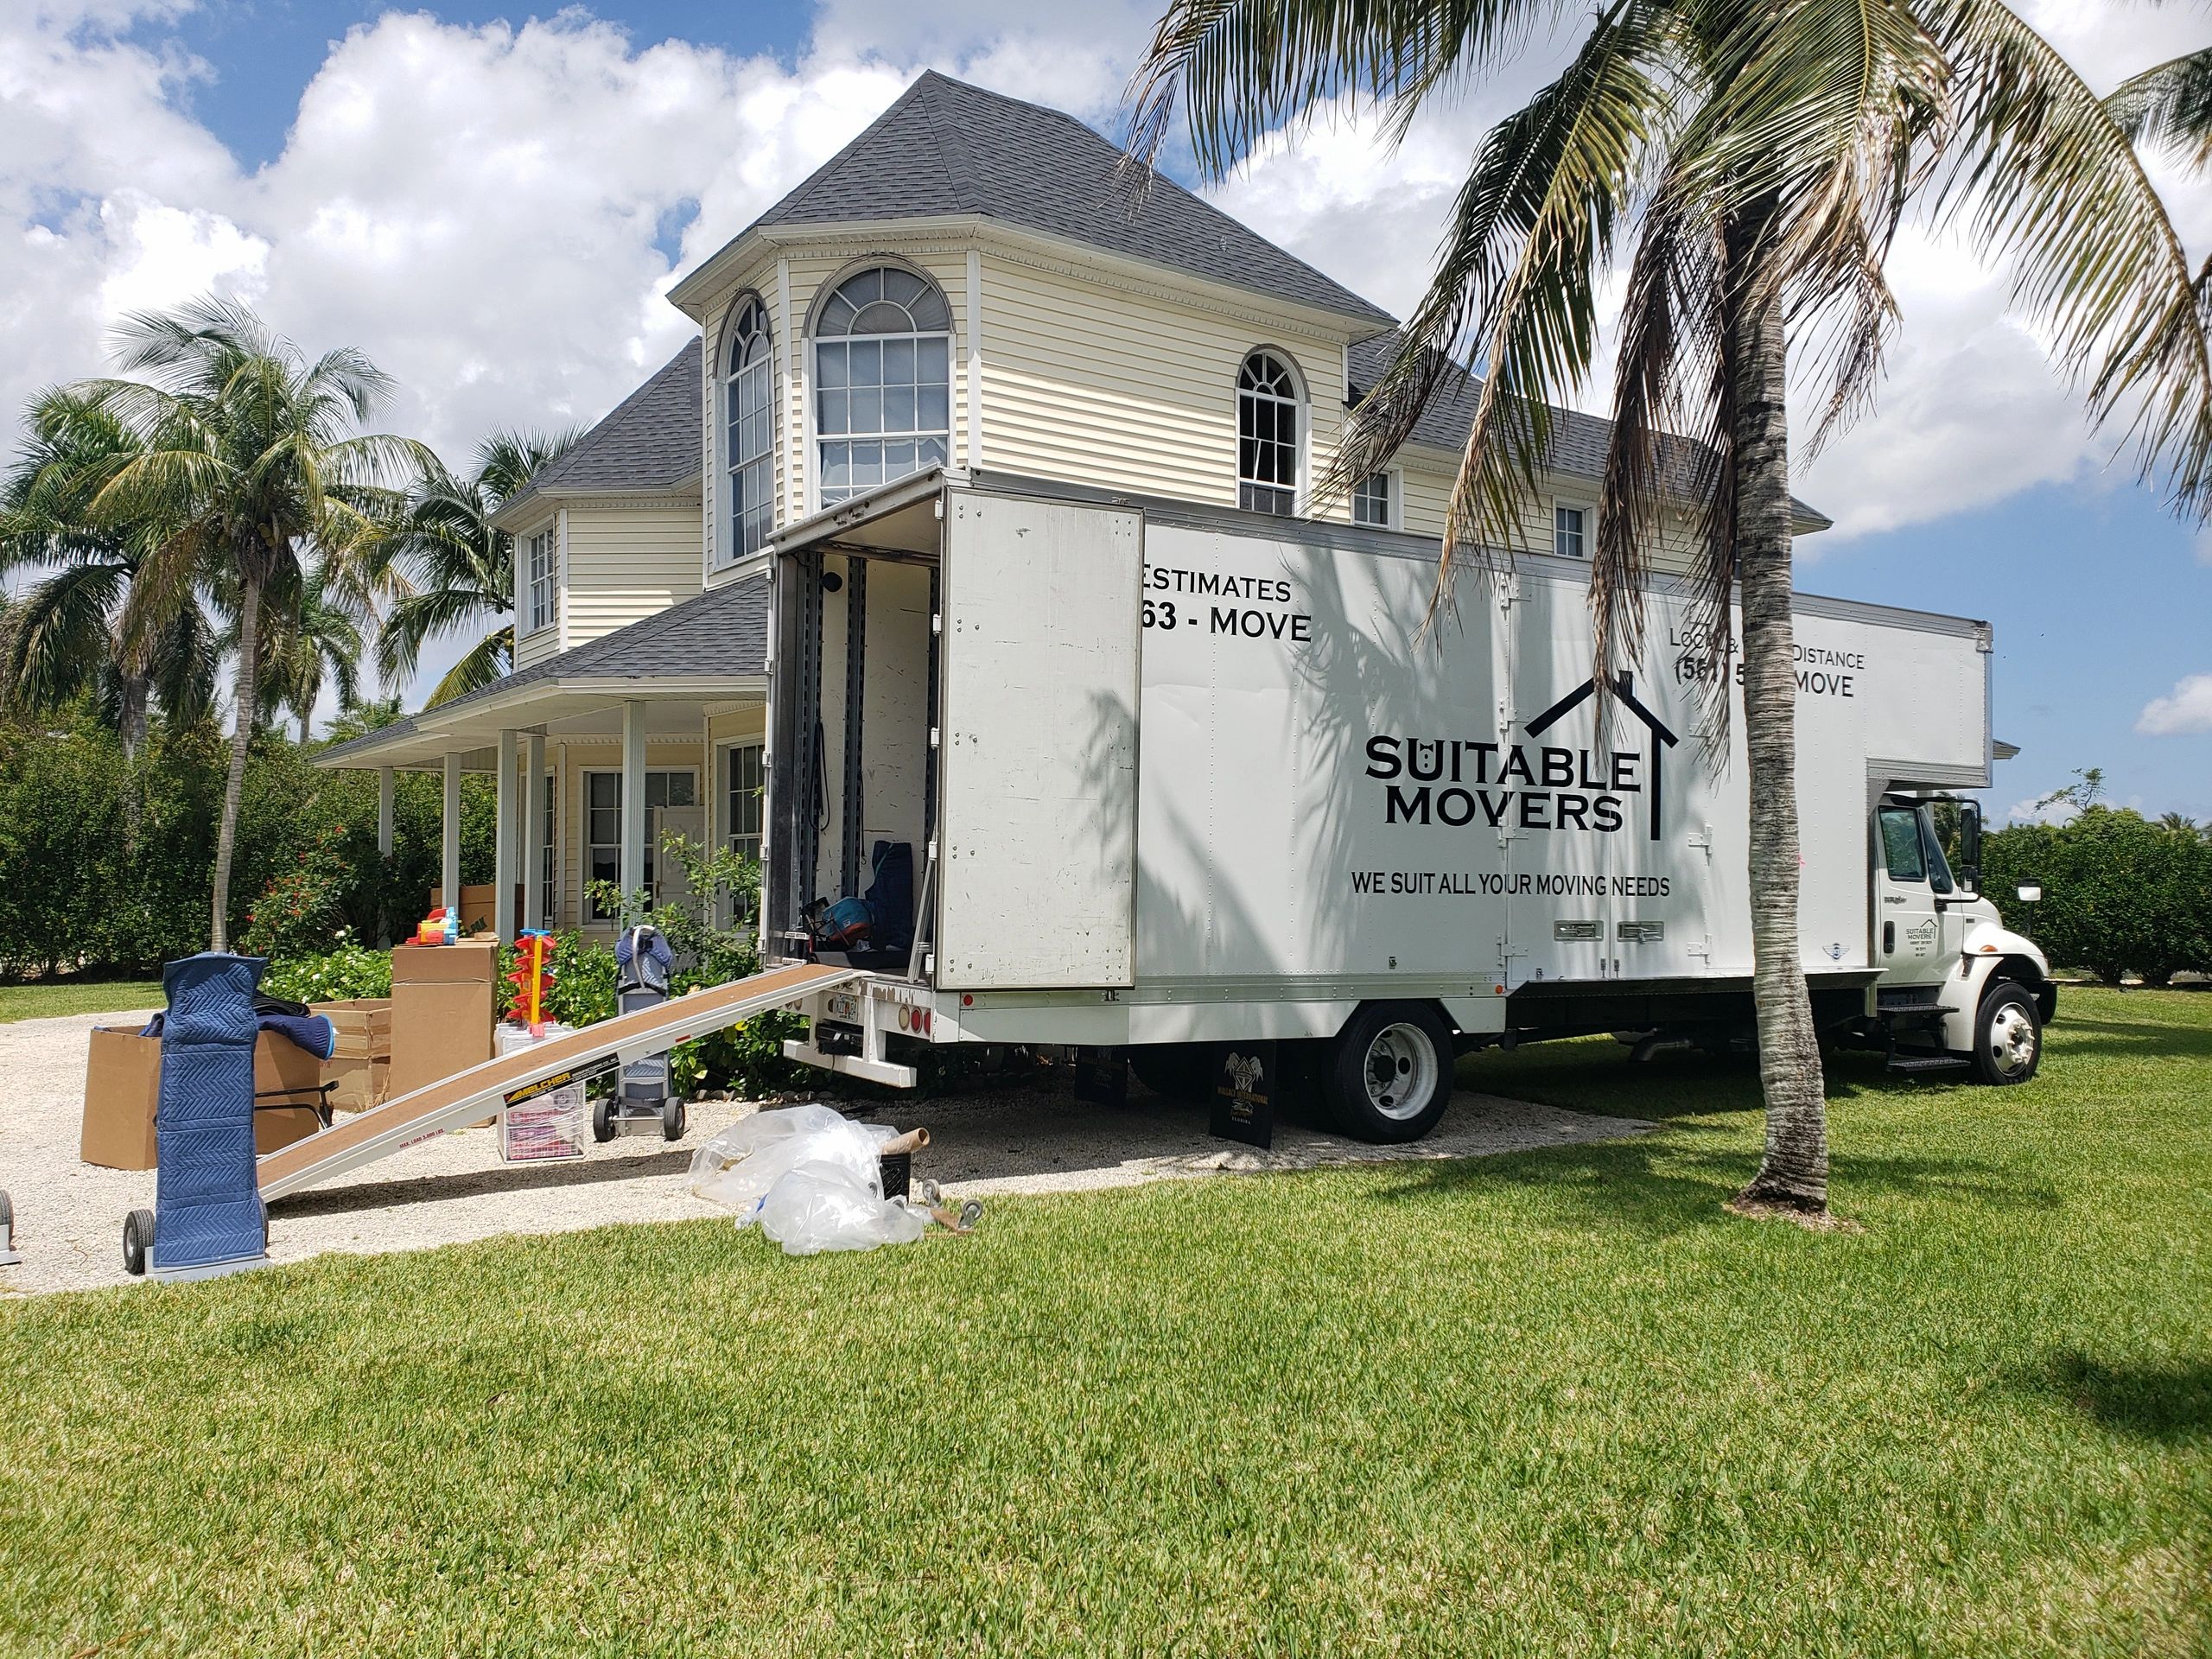 Suitable Movers, South Florida Movers, Broward Movers, Moving Company